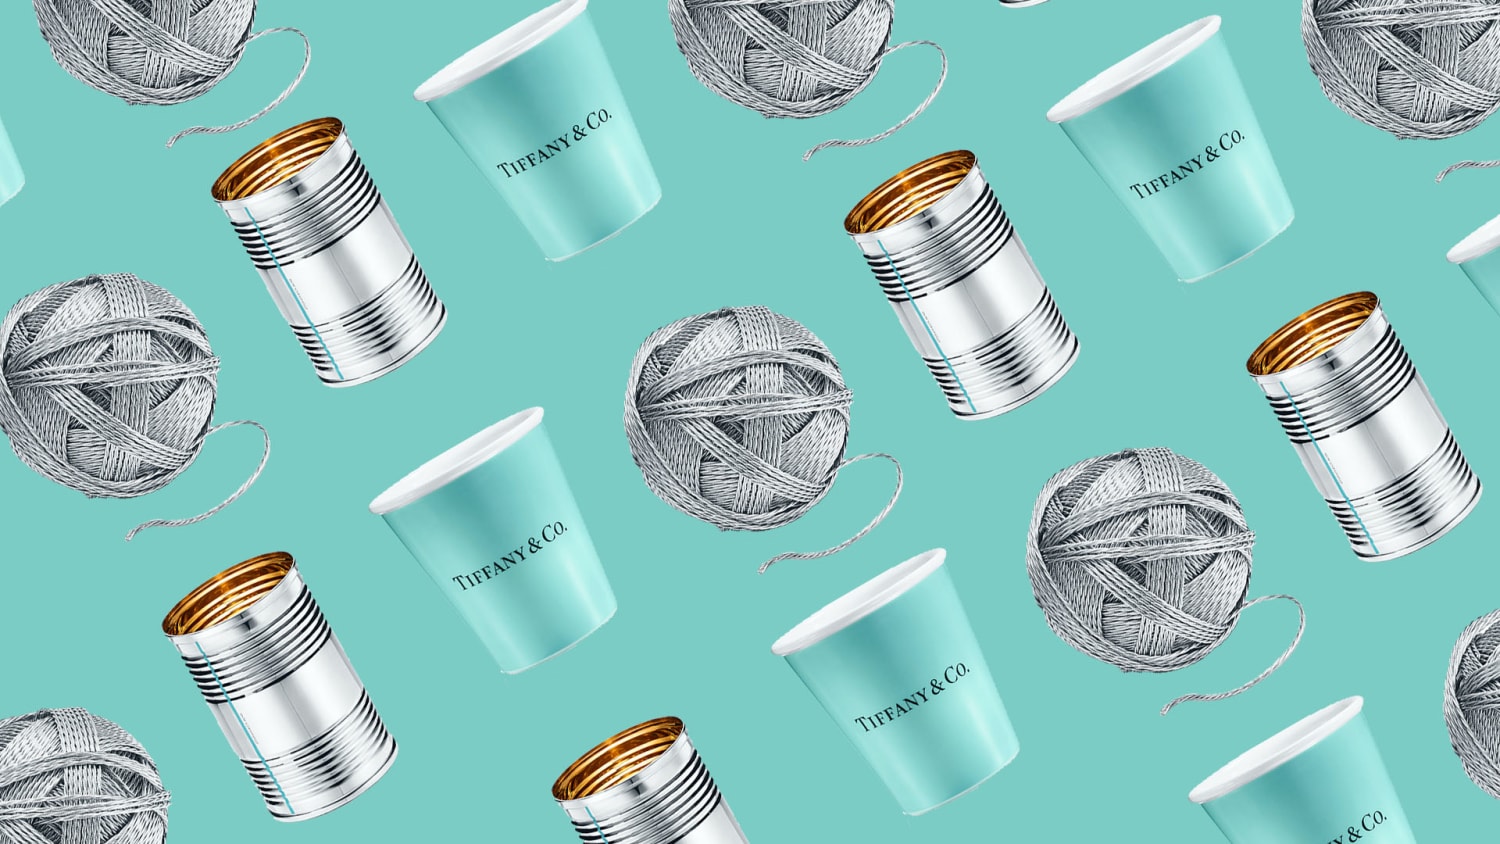 Tiffany Co Launched An Outrageously Indulgent Home And Accessories Line